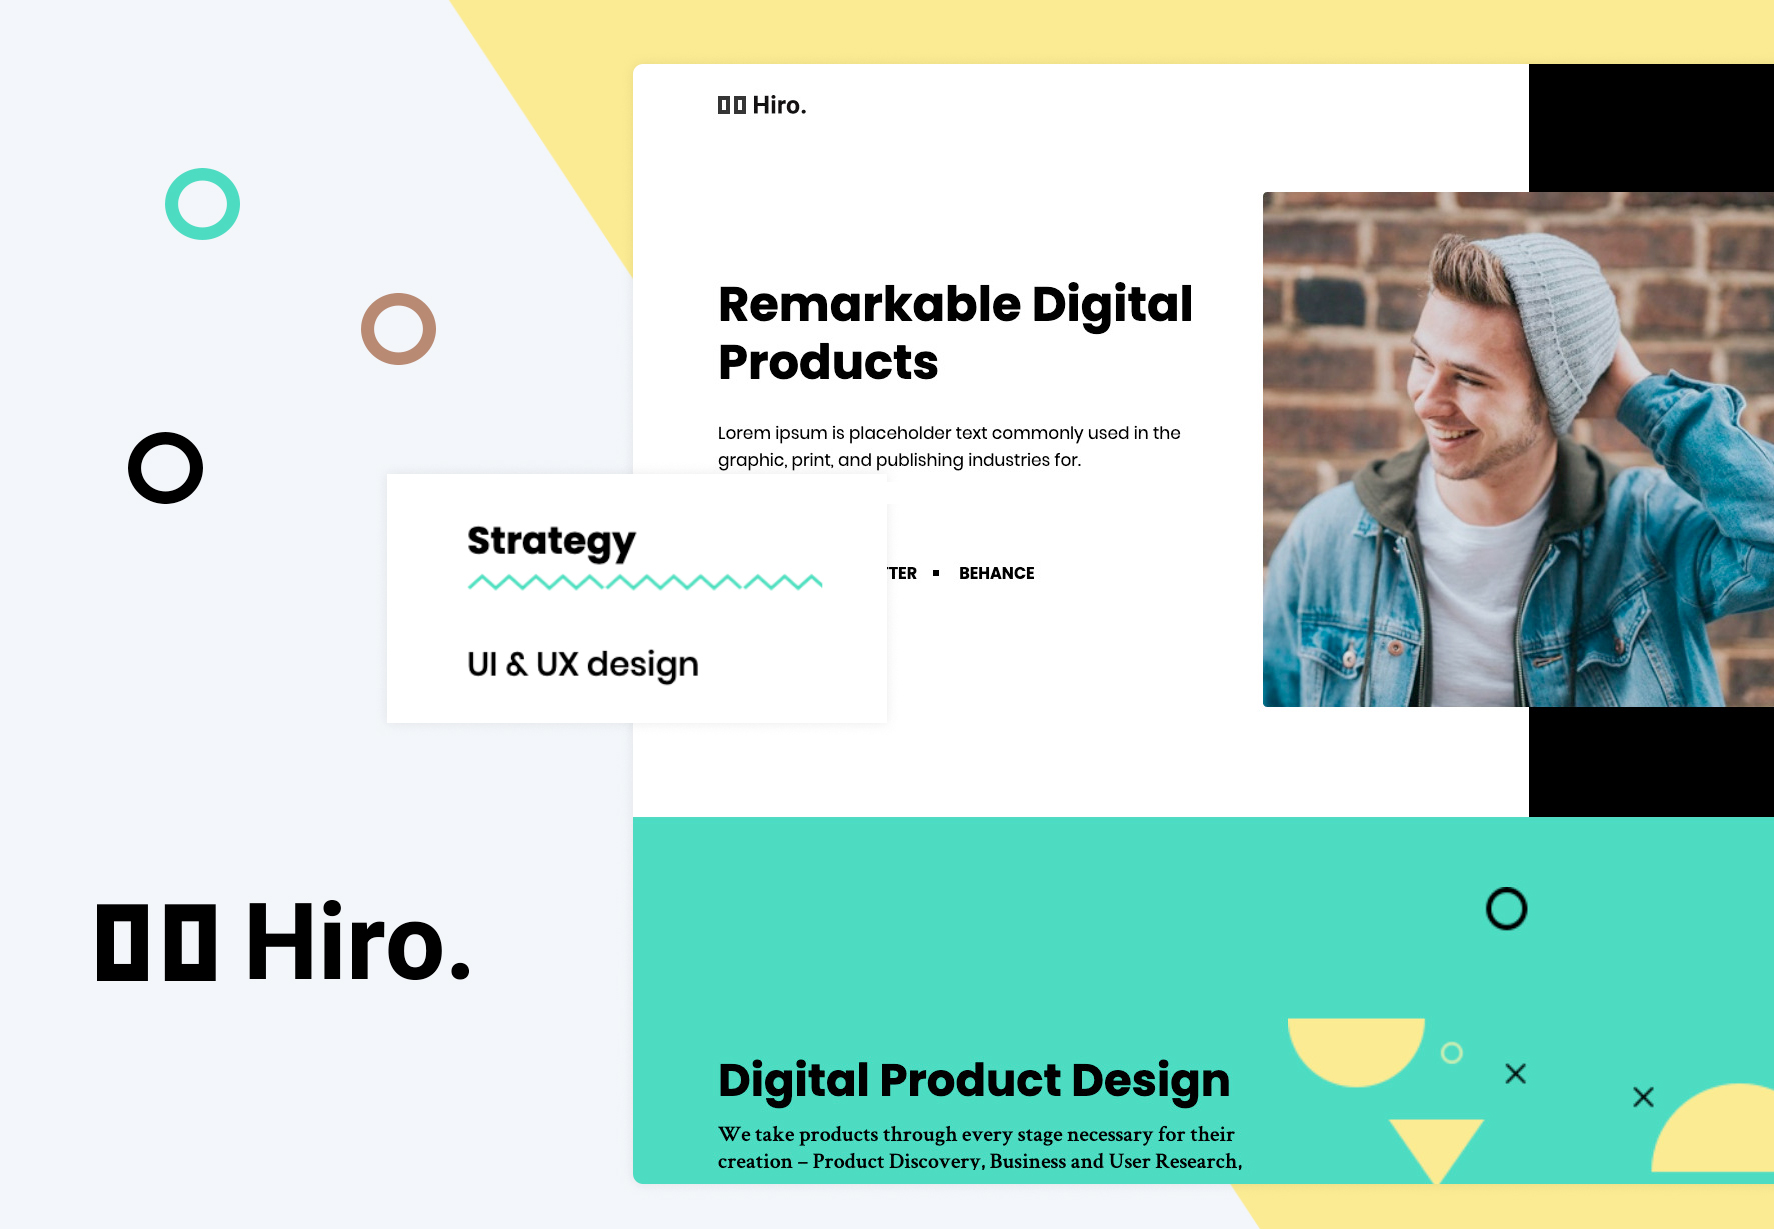 Hiro is an excellent landing page template